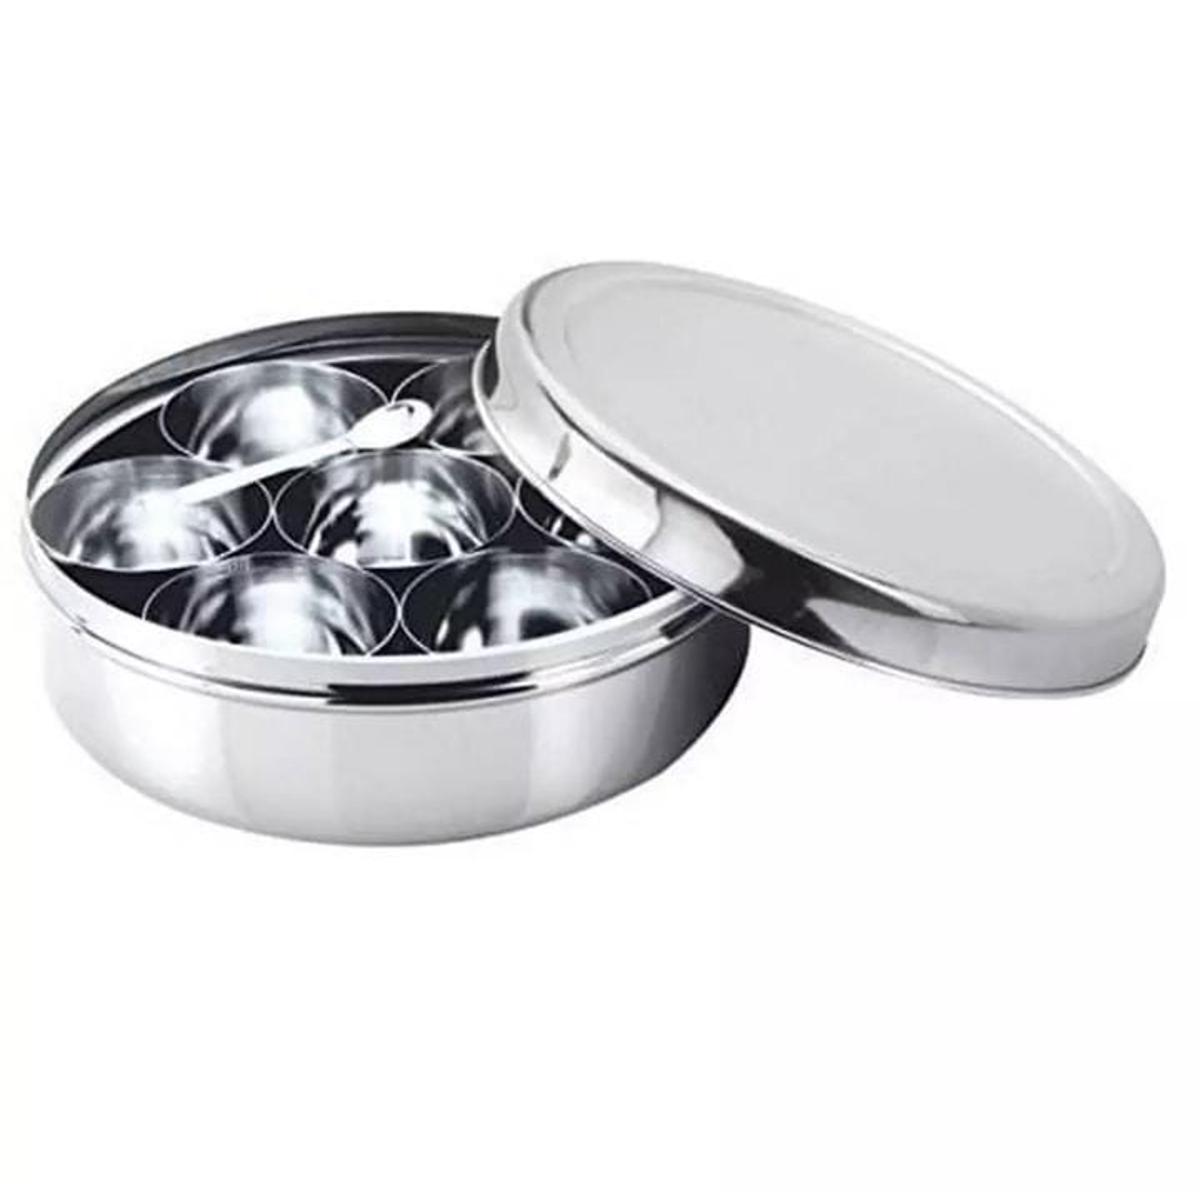 M.R. 7 Pieces Stainless Steel Small Spoons for Container, Spice Jars,  Masala Spoons, Small Spoon for